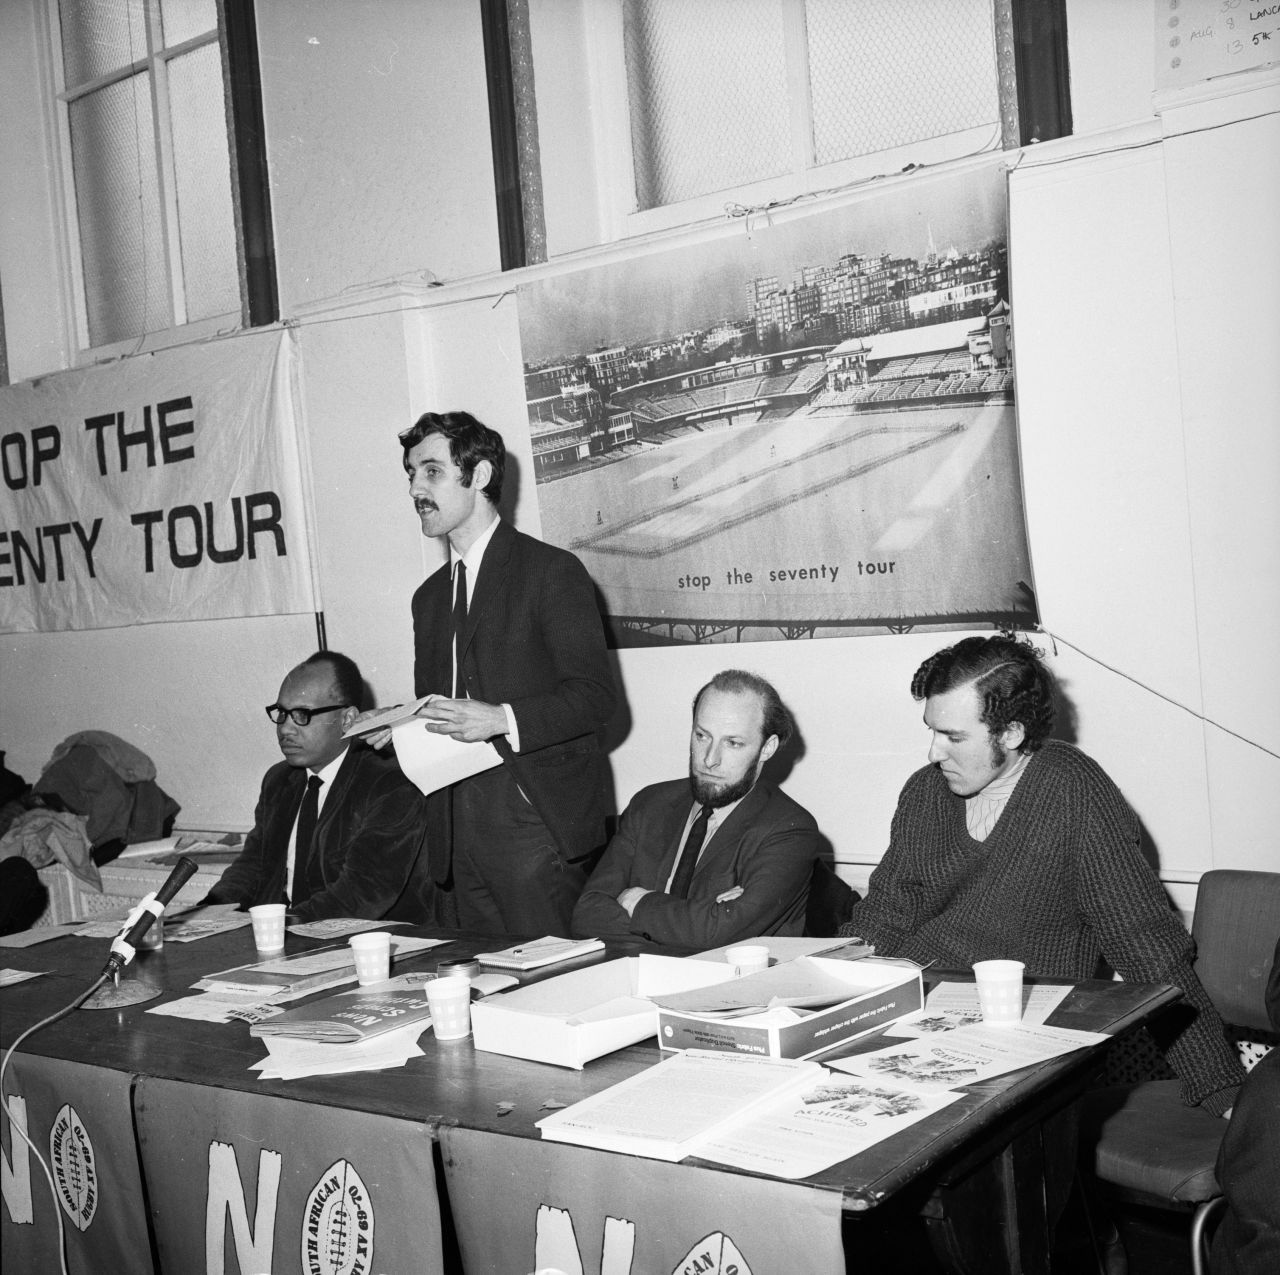 In opposition to the apartheid politics of South Africa, this group of cricketers formed the "Stop the Seventy Tour," a committee set up to stop that year's tour of the South African cricket team to England. On the far right sits Peter Hain, leader of the Young Liberals and a future British MP.